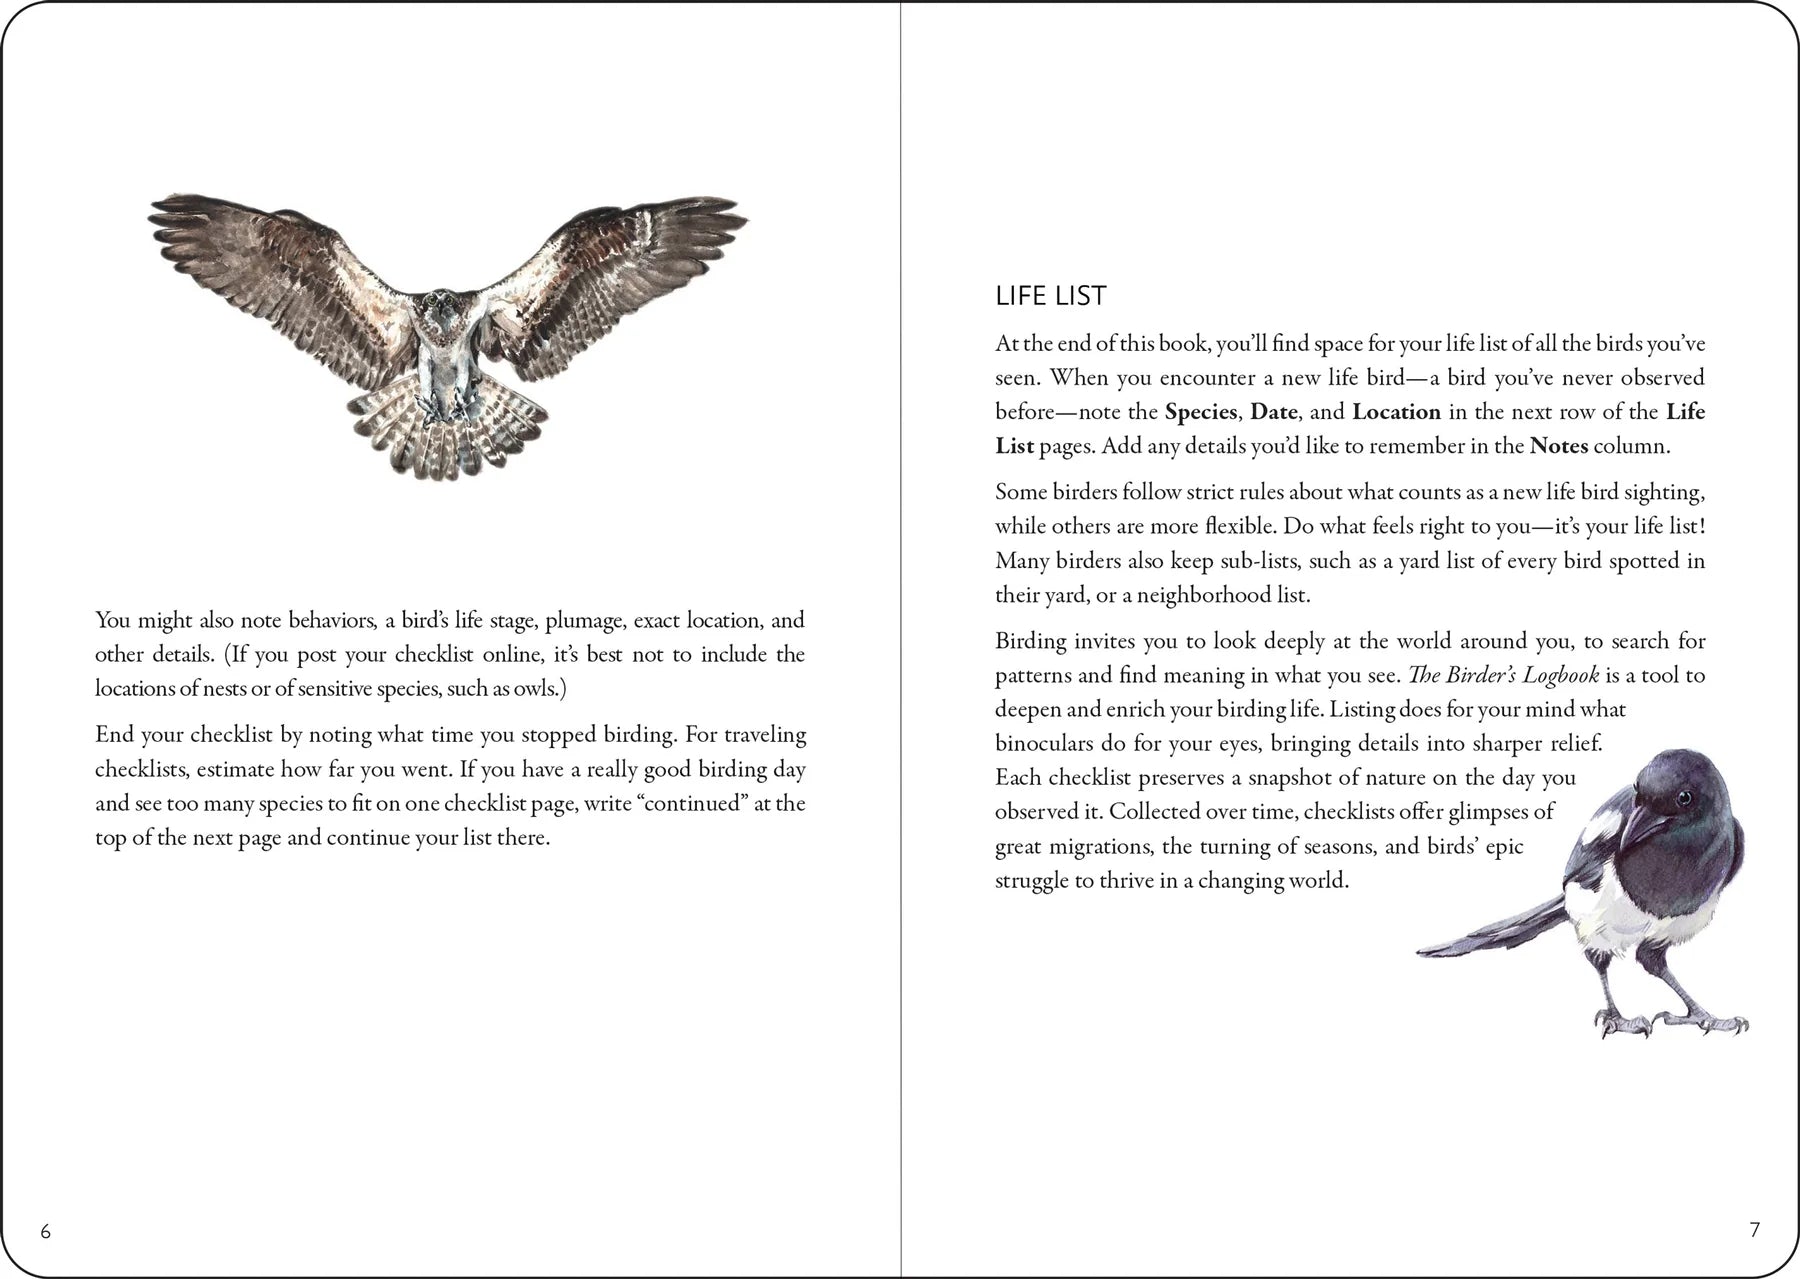 two bages of a book describing how to birdwatch, with a different bird on each page